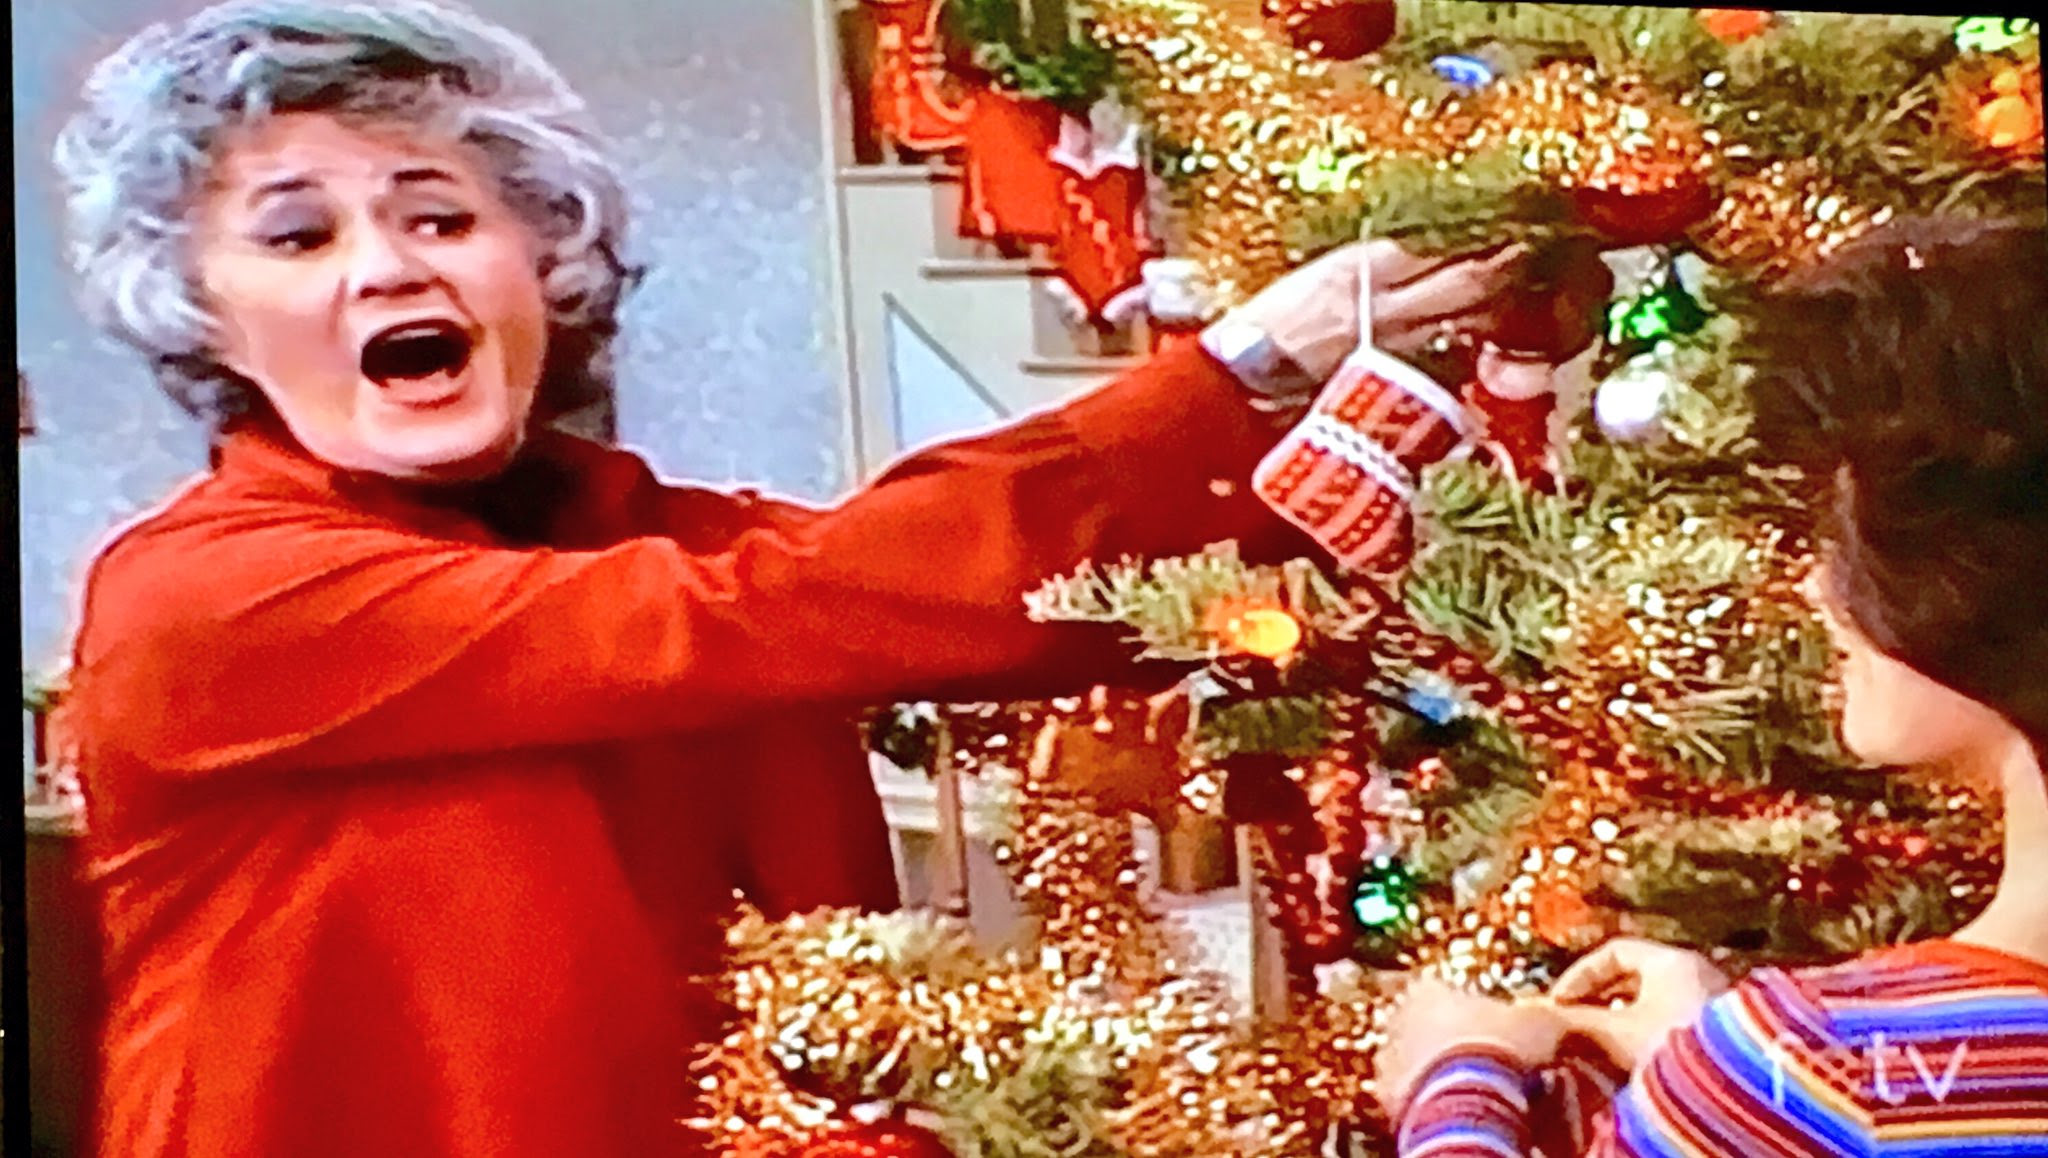 HOLIDAY CHEERS & Movies! on Twitter: "Fresh off the heals of last night's MAUDE episode, it's another Bea Arthur Christmas with 1989's “Have Yourself a Very Little Christmas” episode of THE GOLDEN